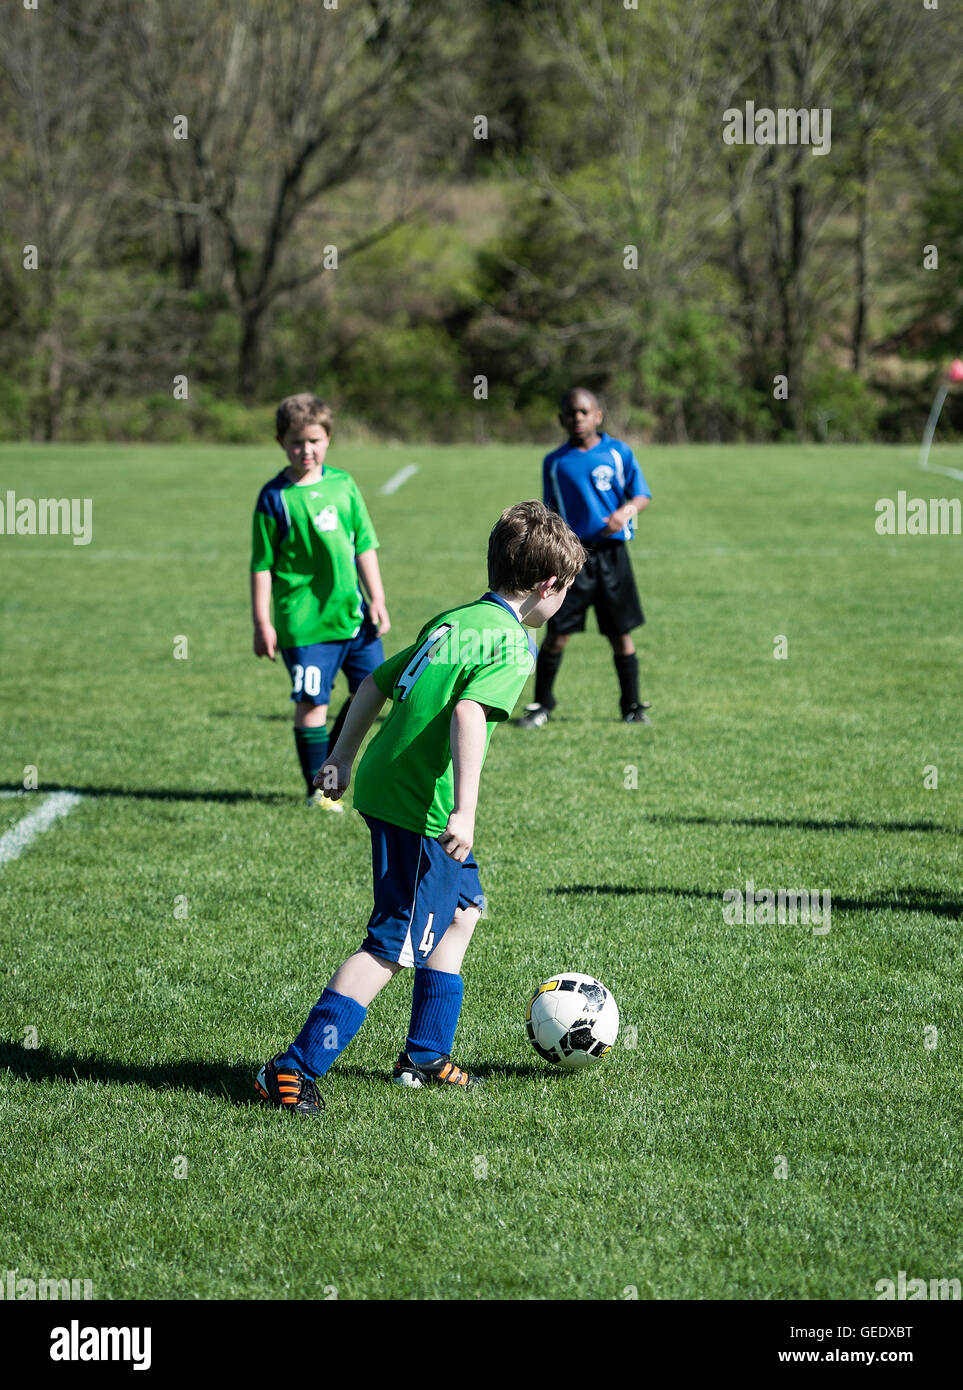 Youth soccer game. Stock Photo